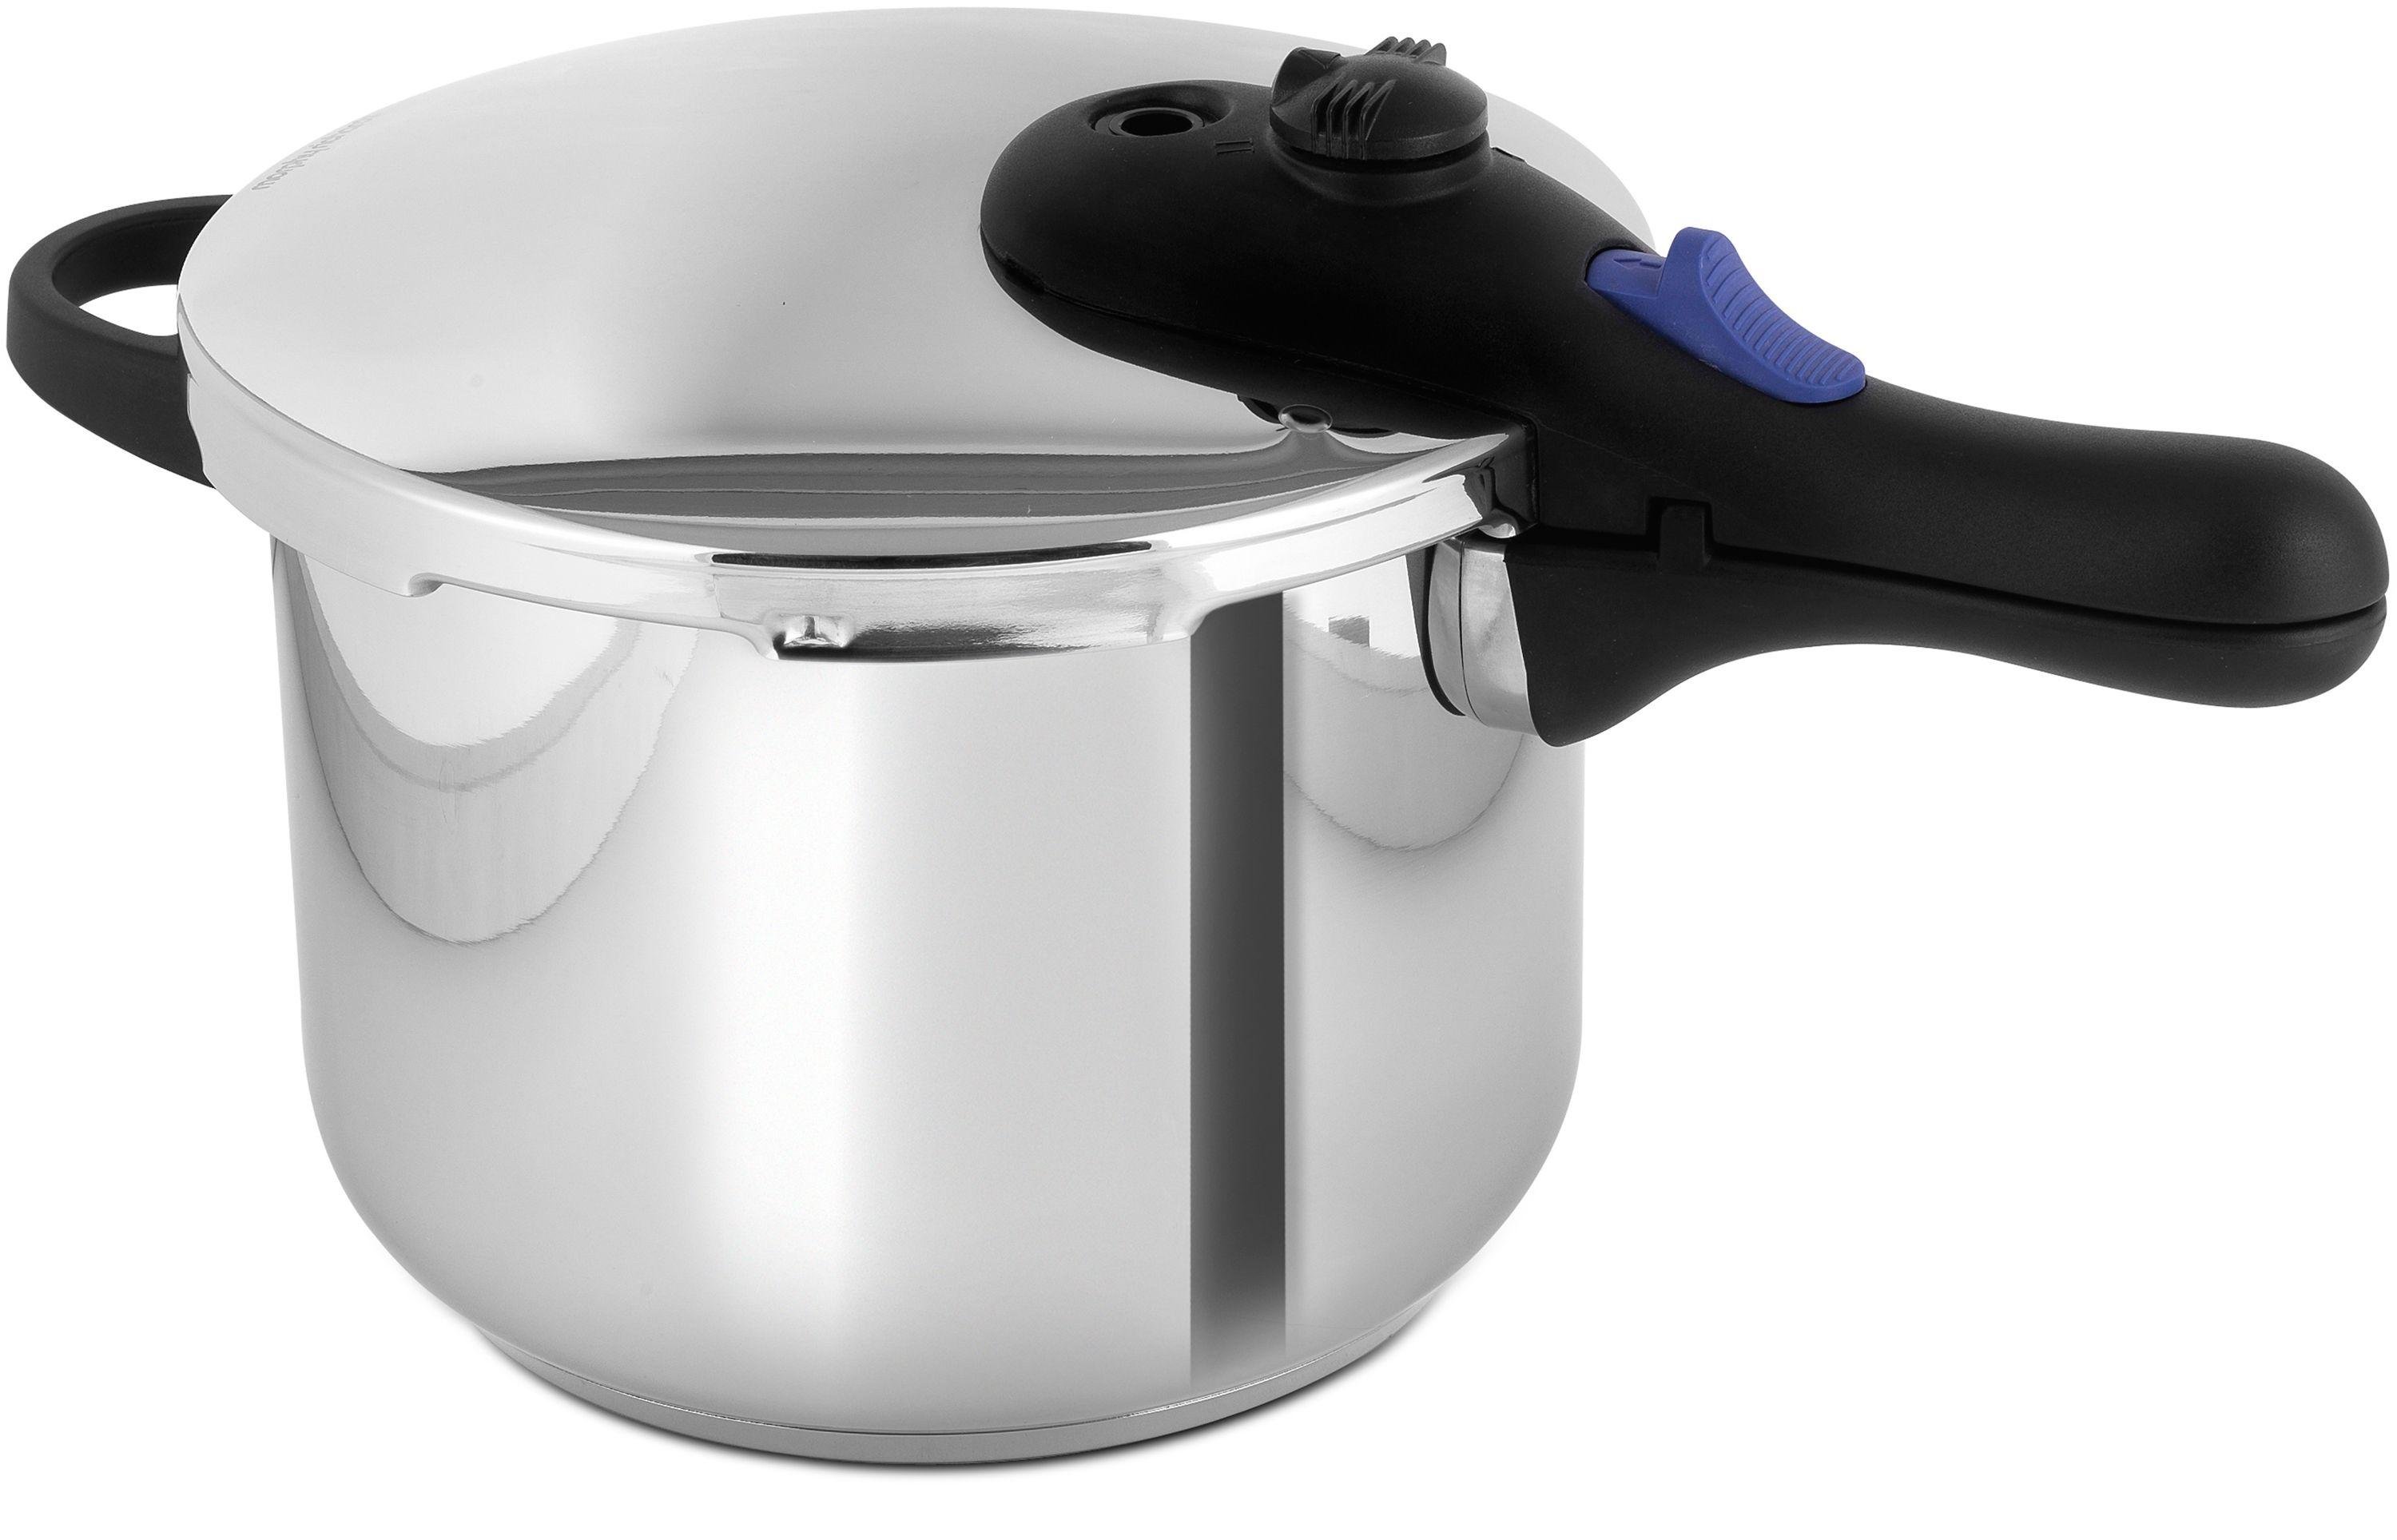 Morphy Richards Equip 2.7L Stainless Steel Pressure Cooker